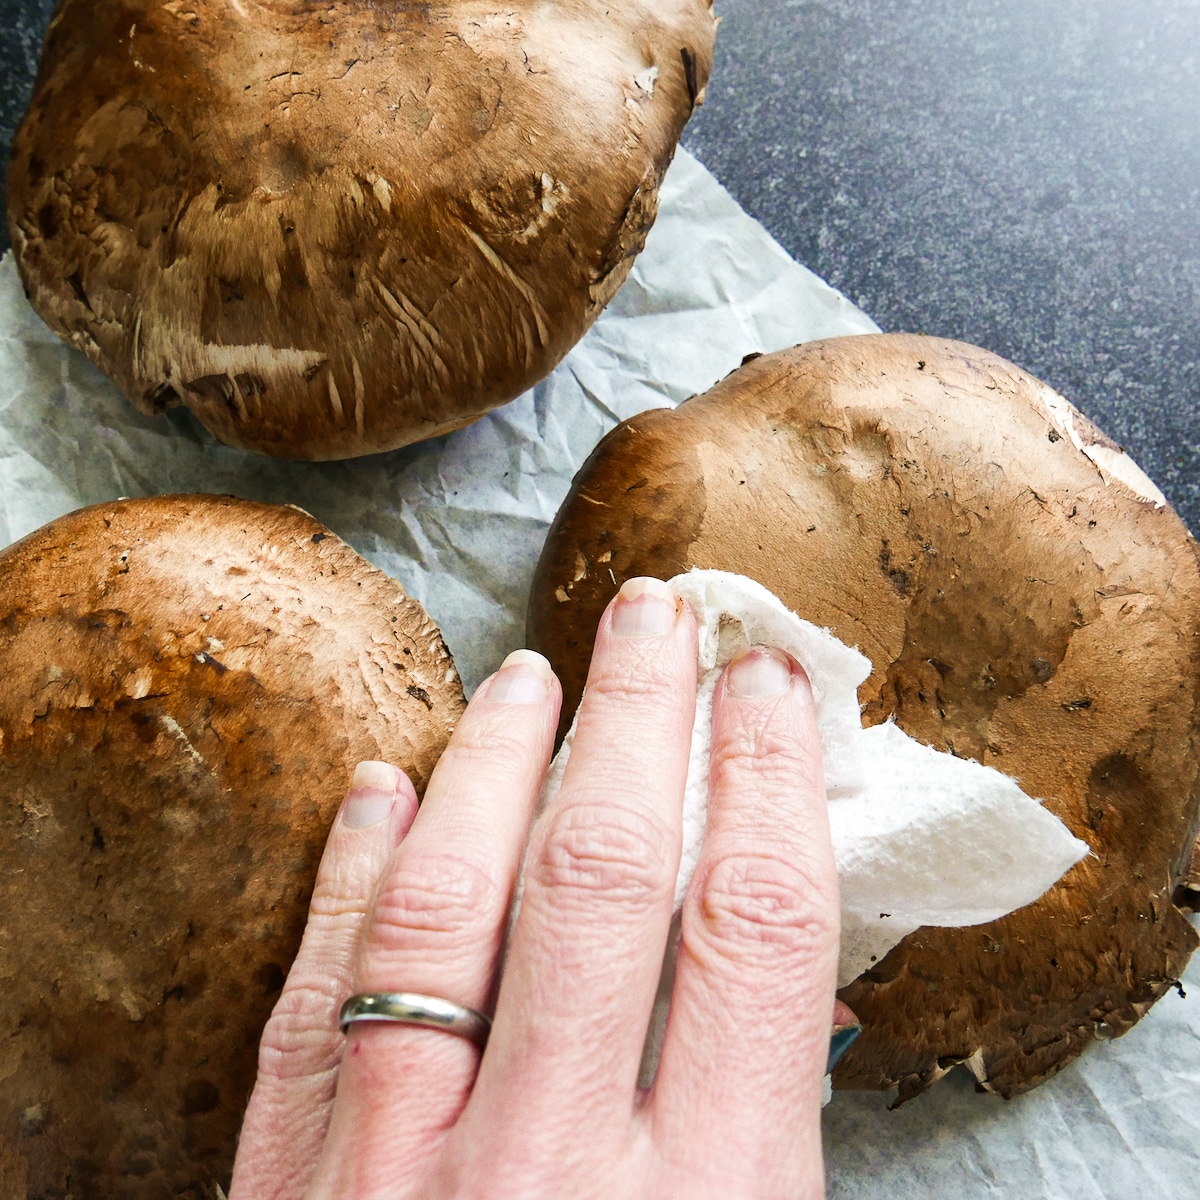 Hand wiping portobello mushrooms clean with a paper towel.